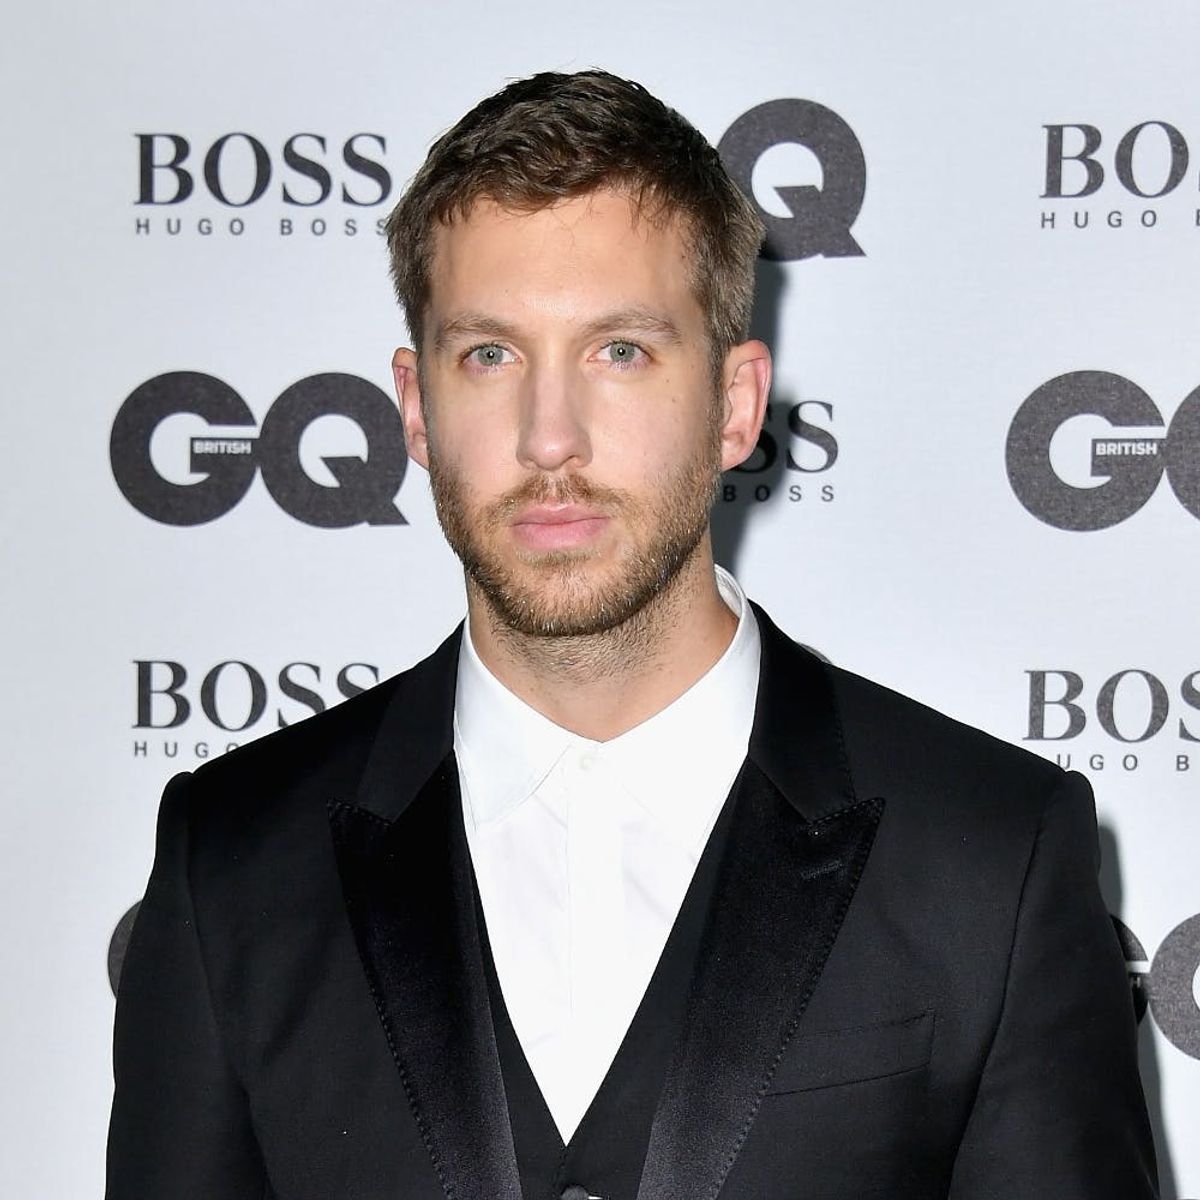 Calvin Harris Says “All Hell Broke Loose” When Taylor Swift Dumped Him